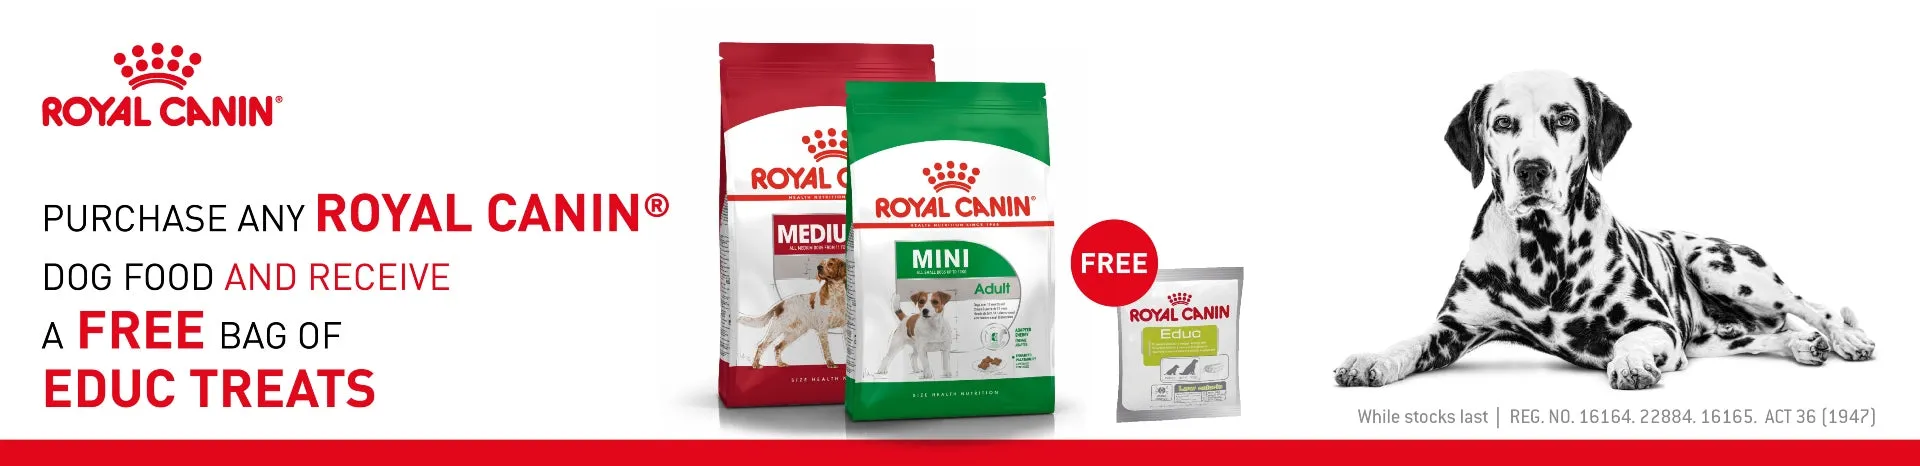 Royal Canin dog food specials. Canin & Co specials 